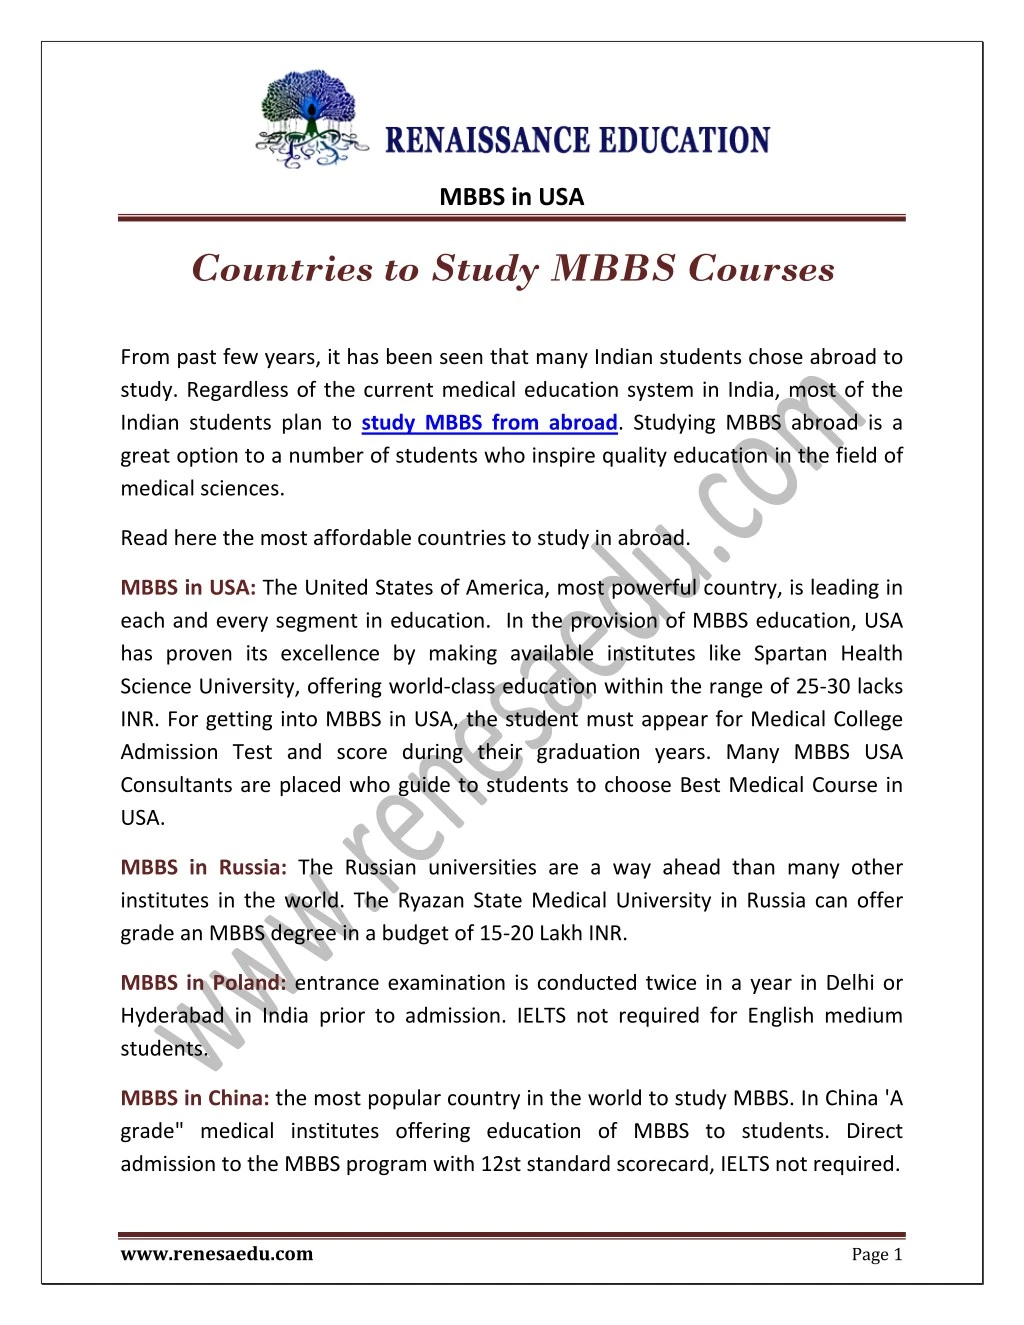 mbbs in usa